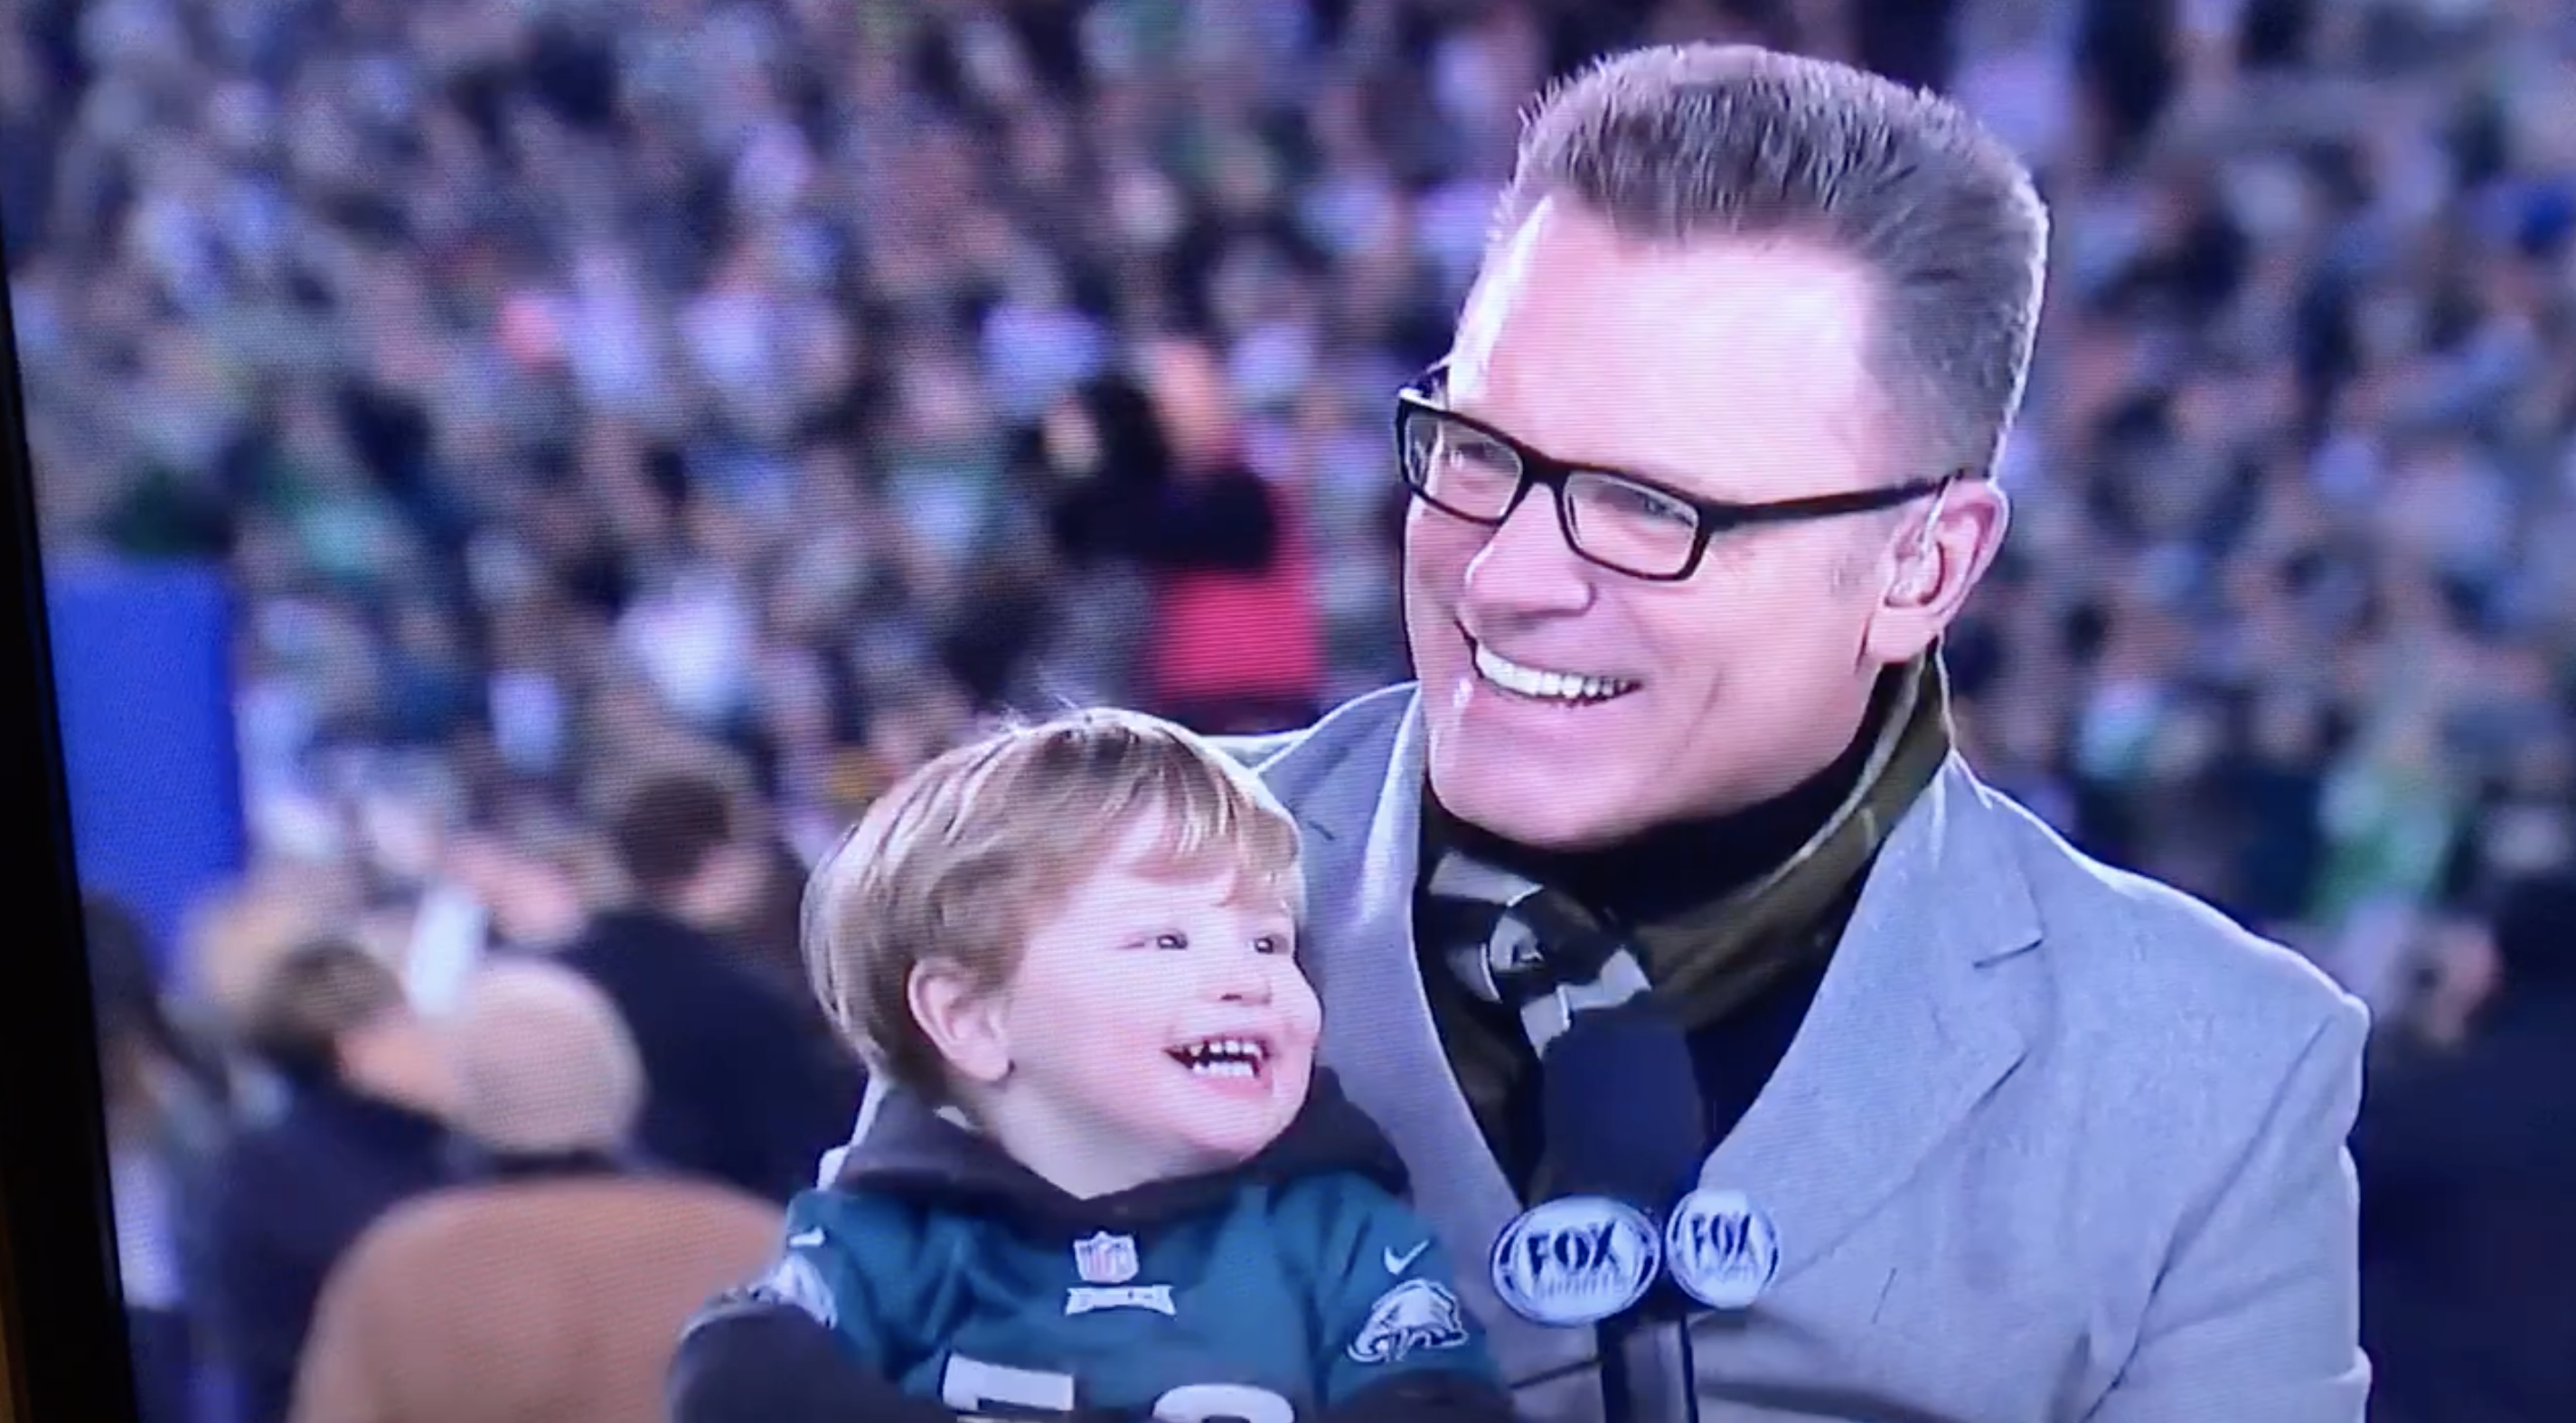 Chris Long's adorable son celebrated an Eagles win with grandpa Howie